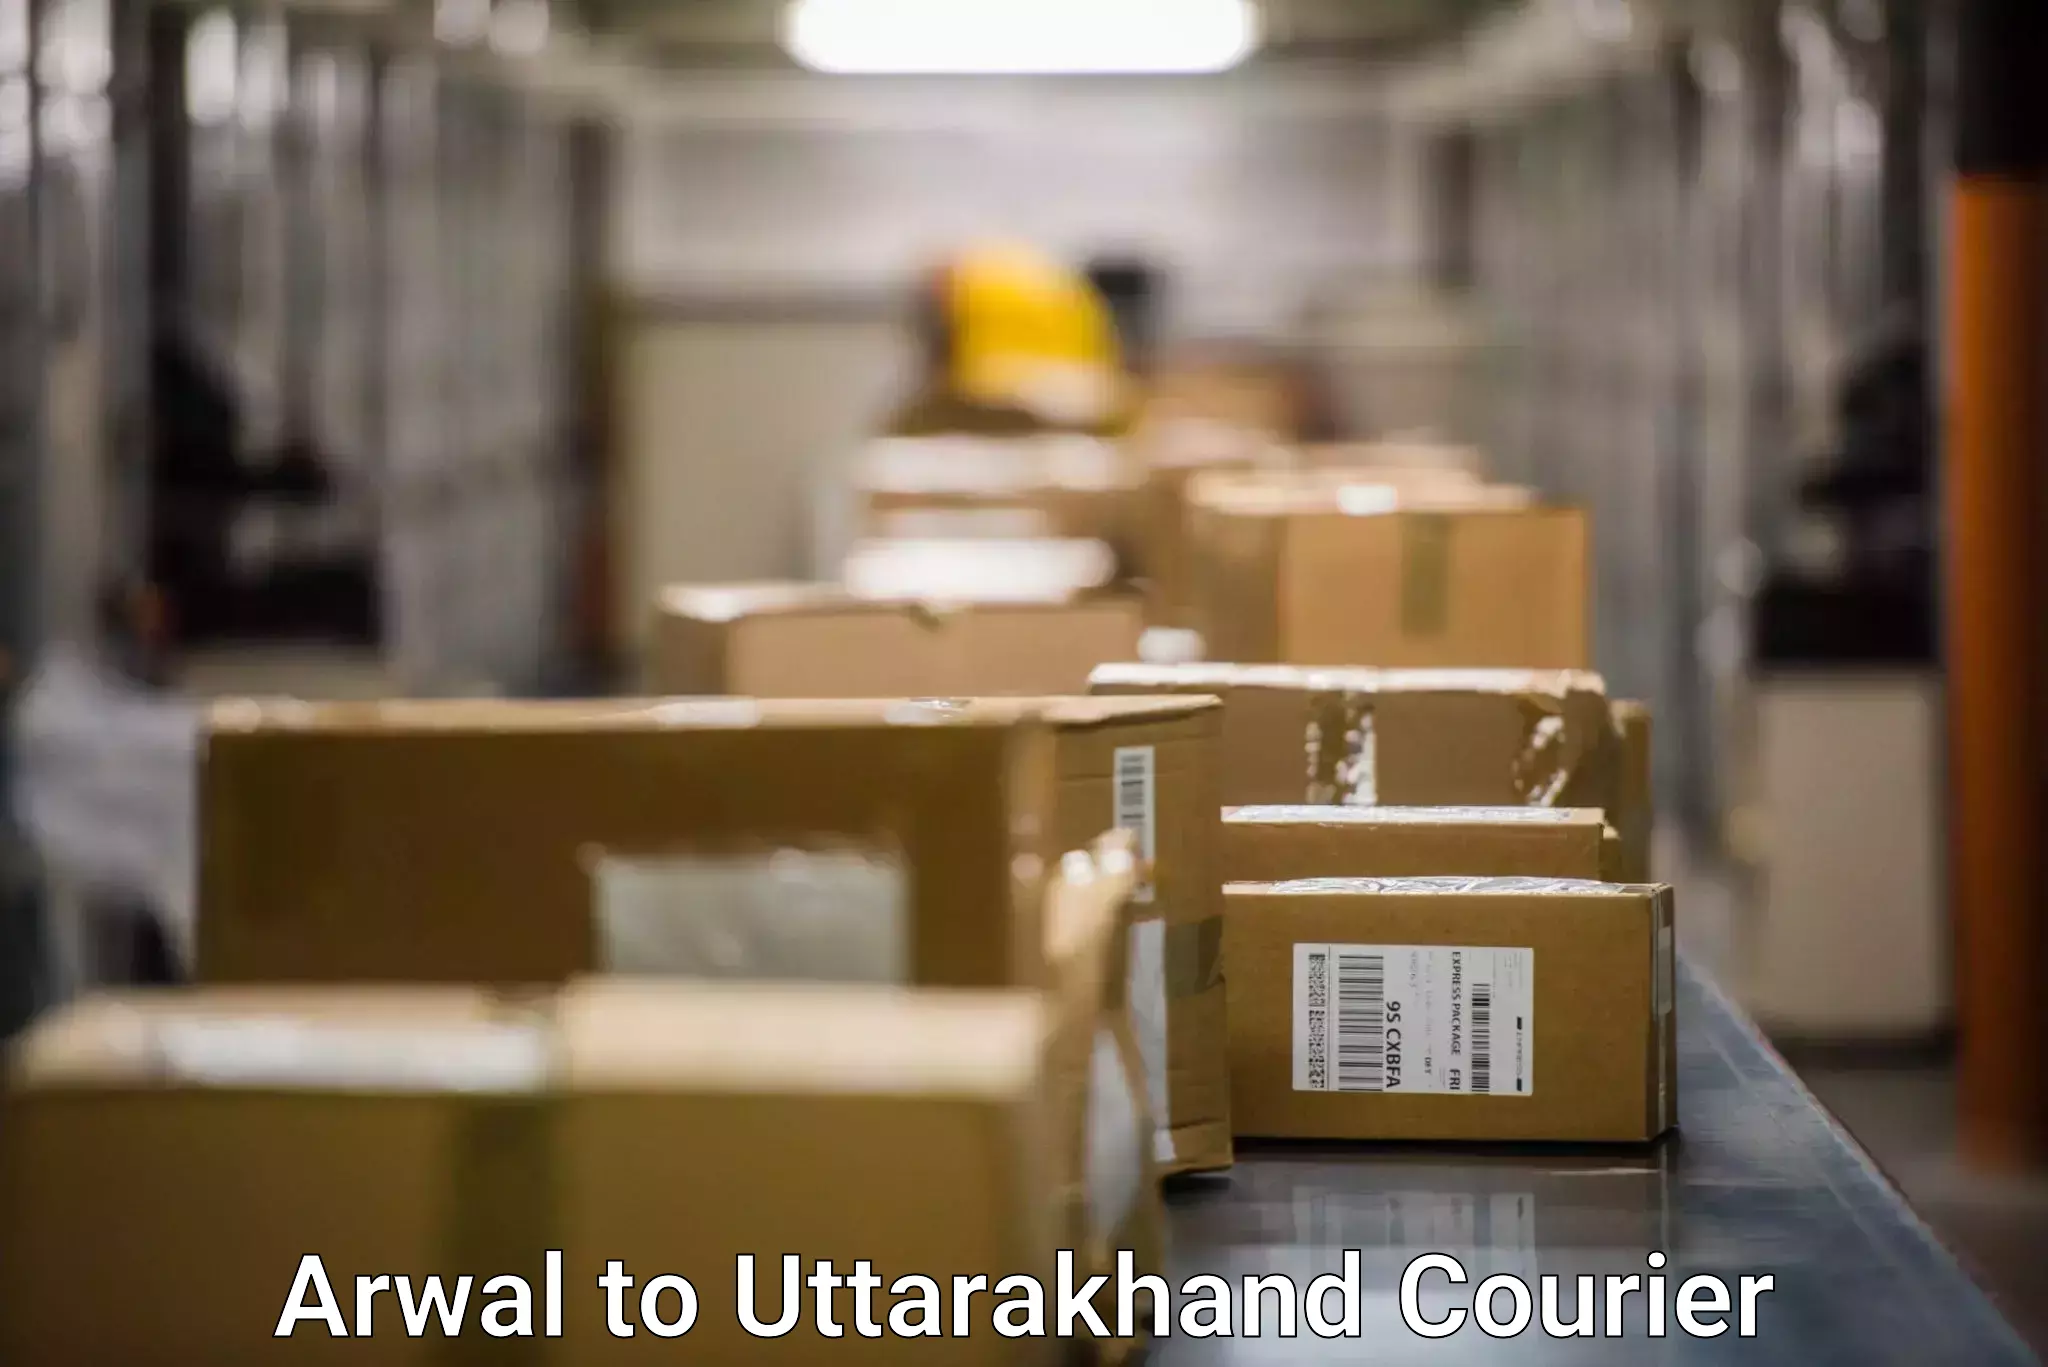 Next-day delivery options Arwal to Uttarakhand